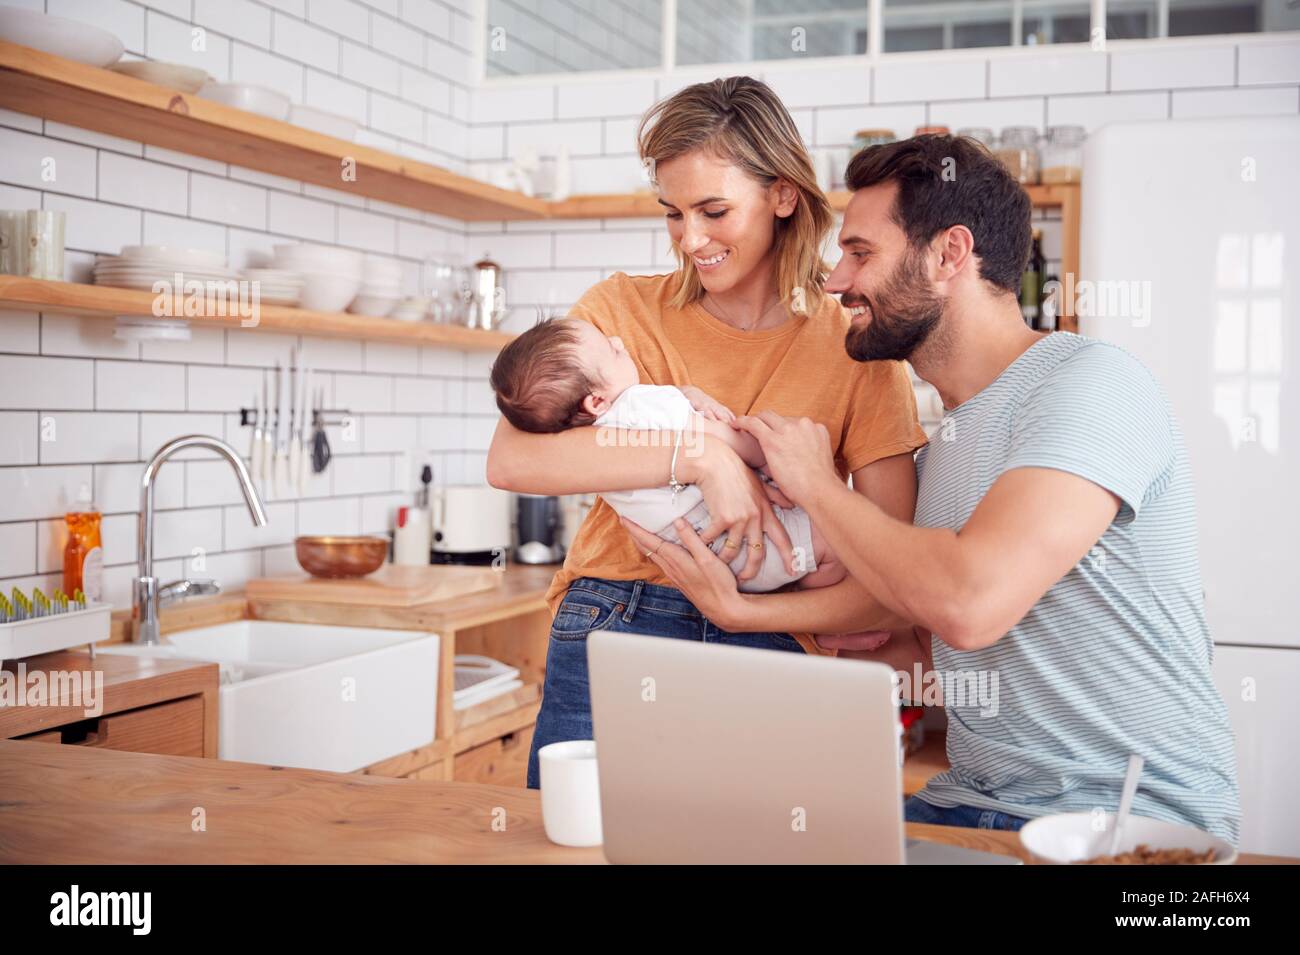 Busy Family In Kitchen At Breakfast With Mother Caring For Baby Son Stock Photo